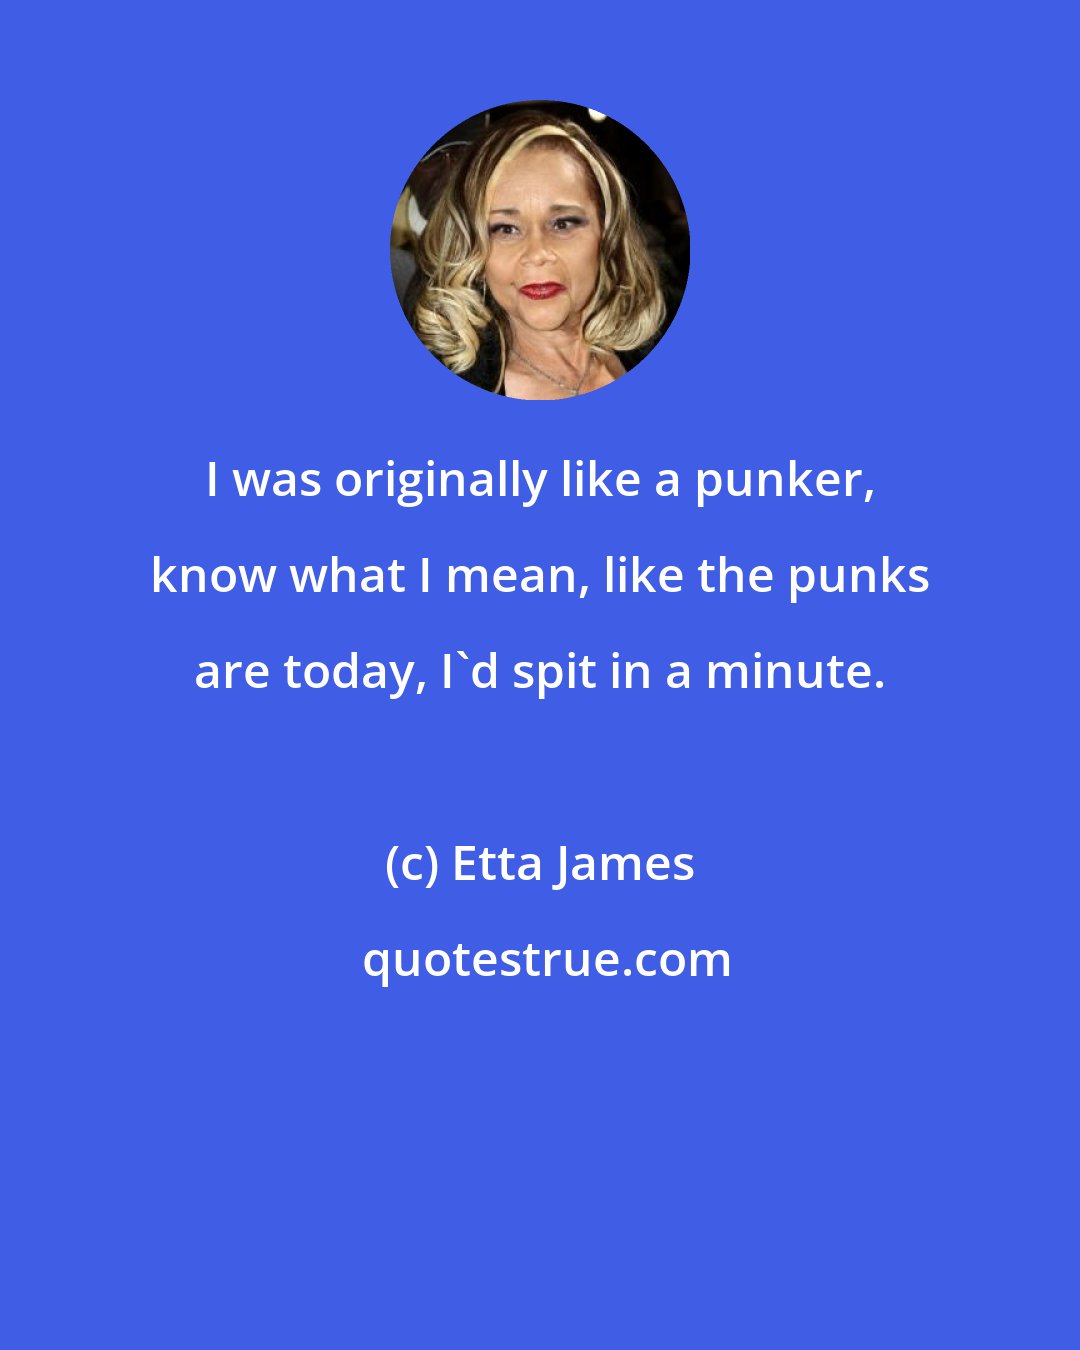 Etta James: I was originally like a punker, know what I mean, like the punks are today, I'd spit in a minute.